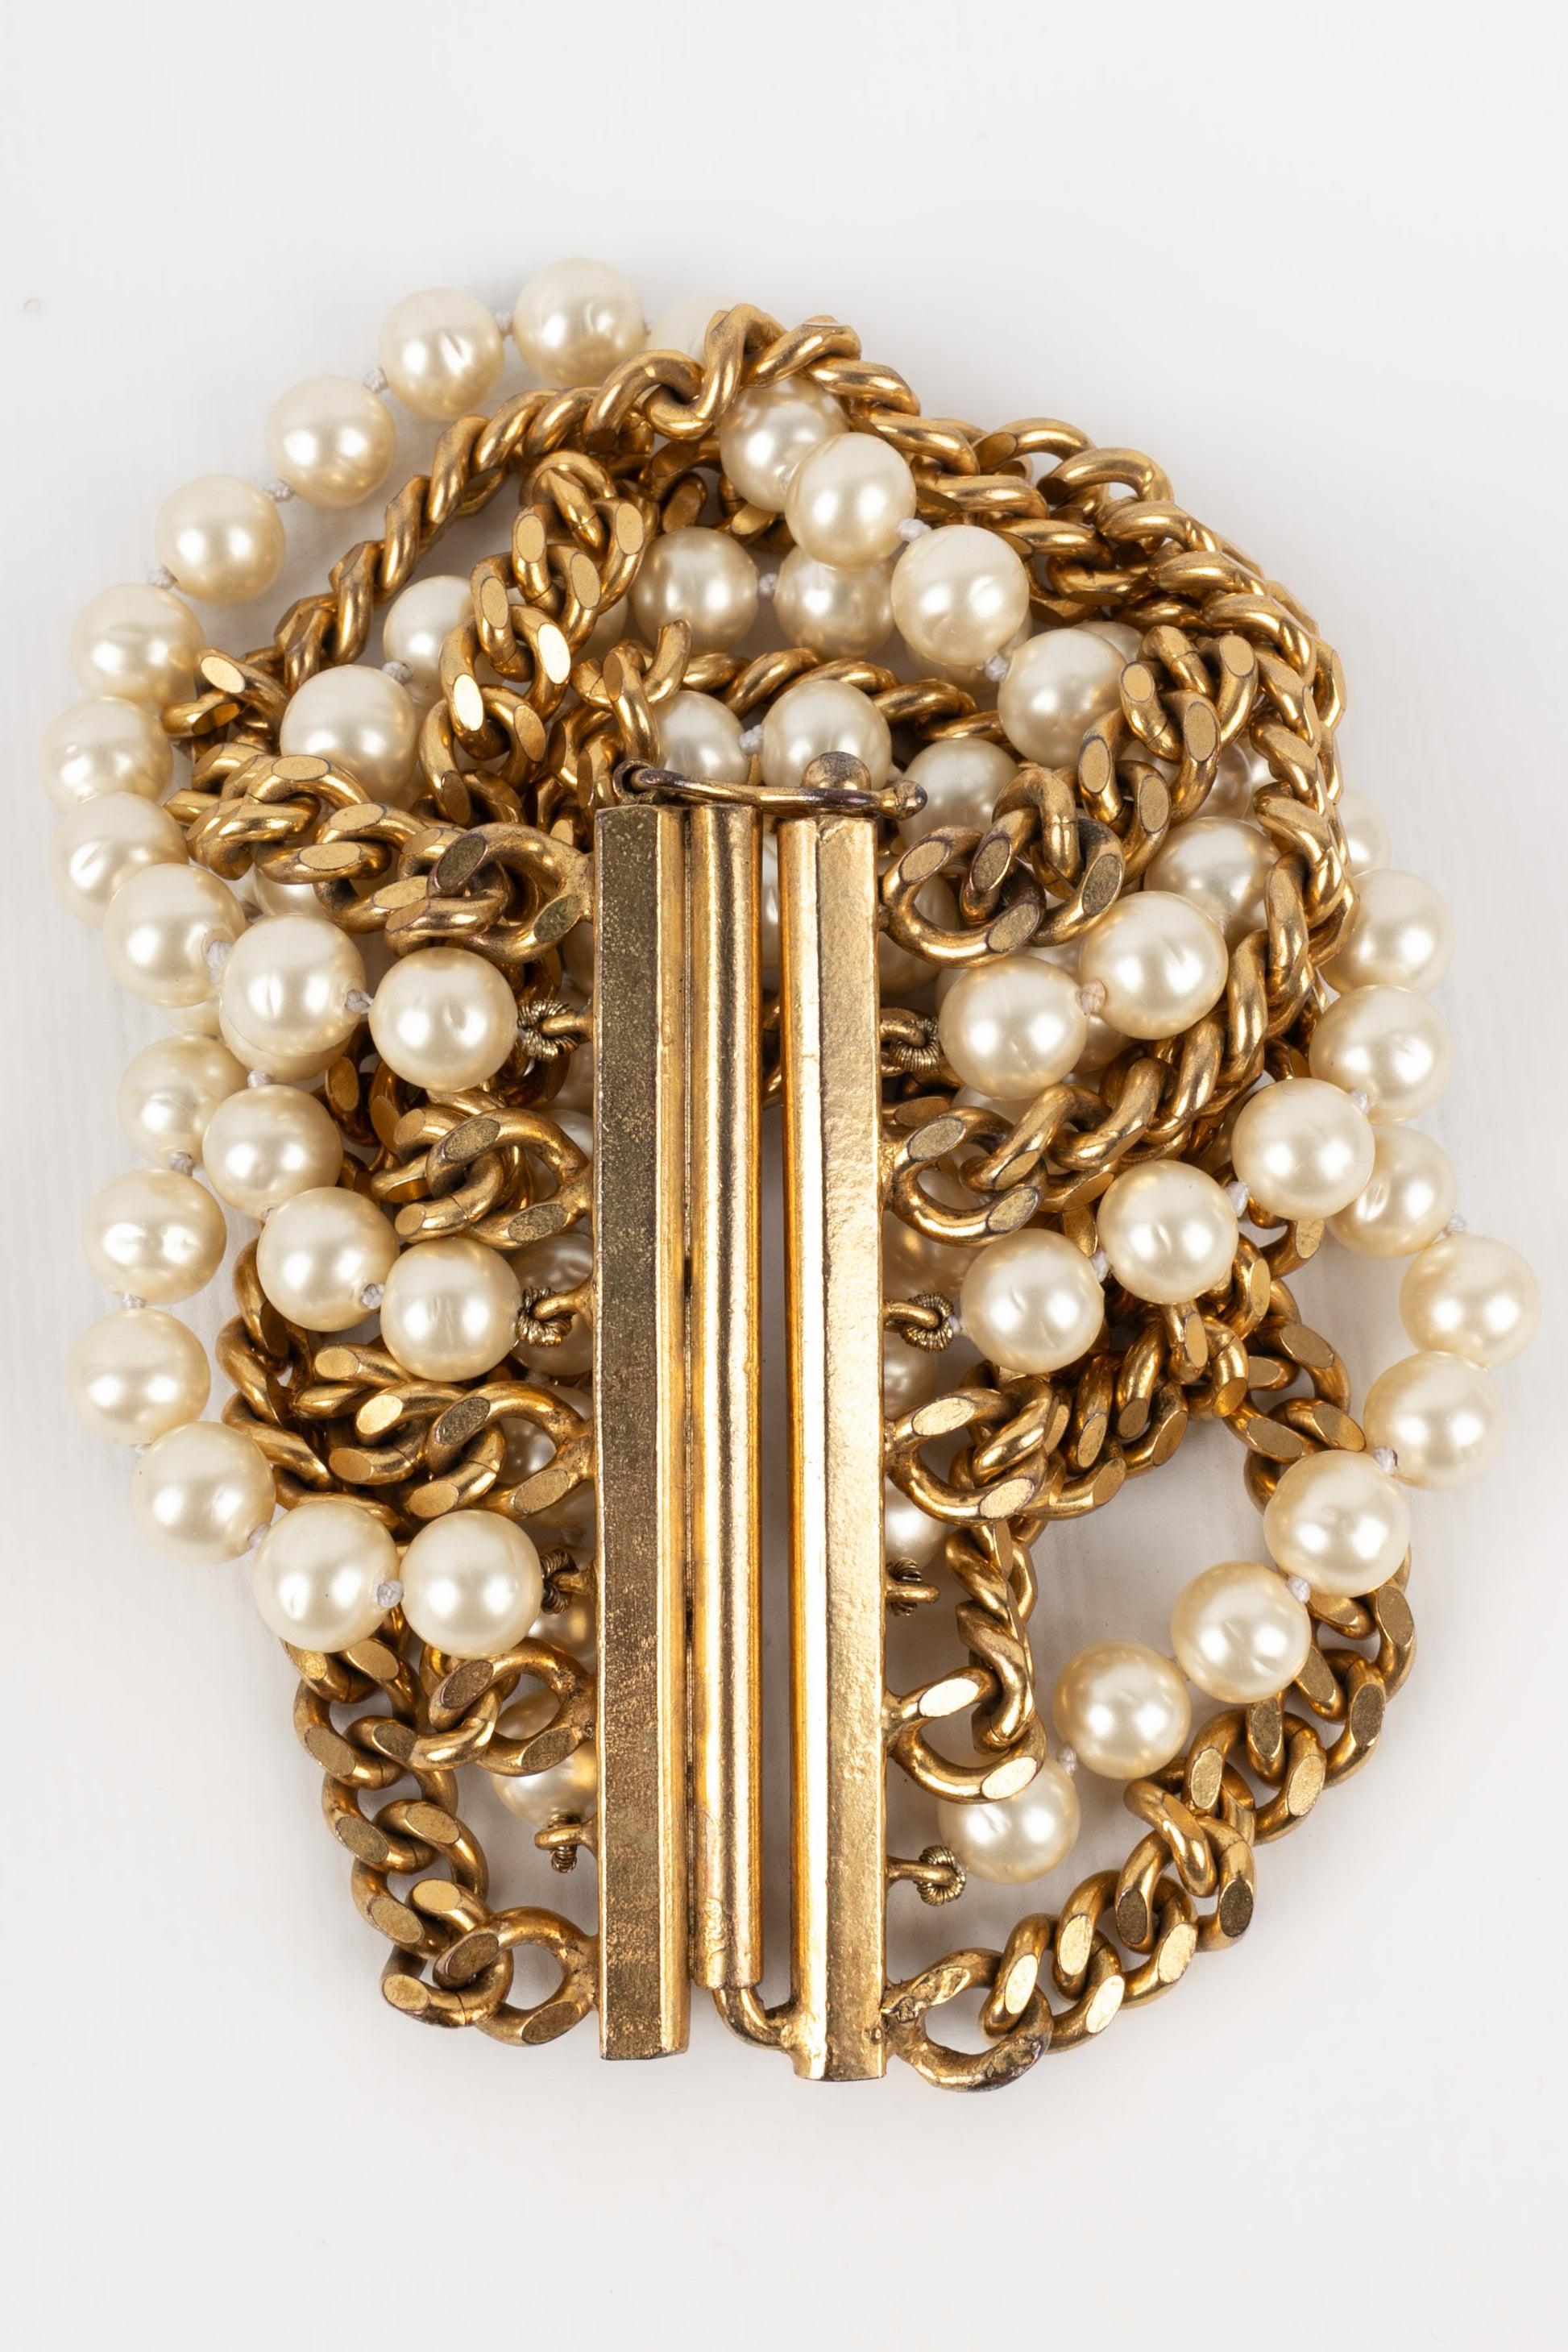 Chanel Large Golden Metal Bracelet with Costume Pearls 3